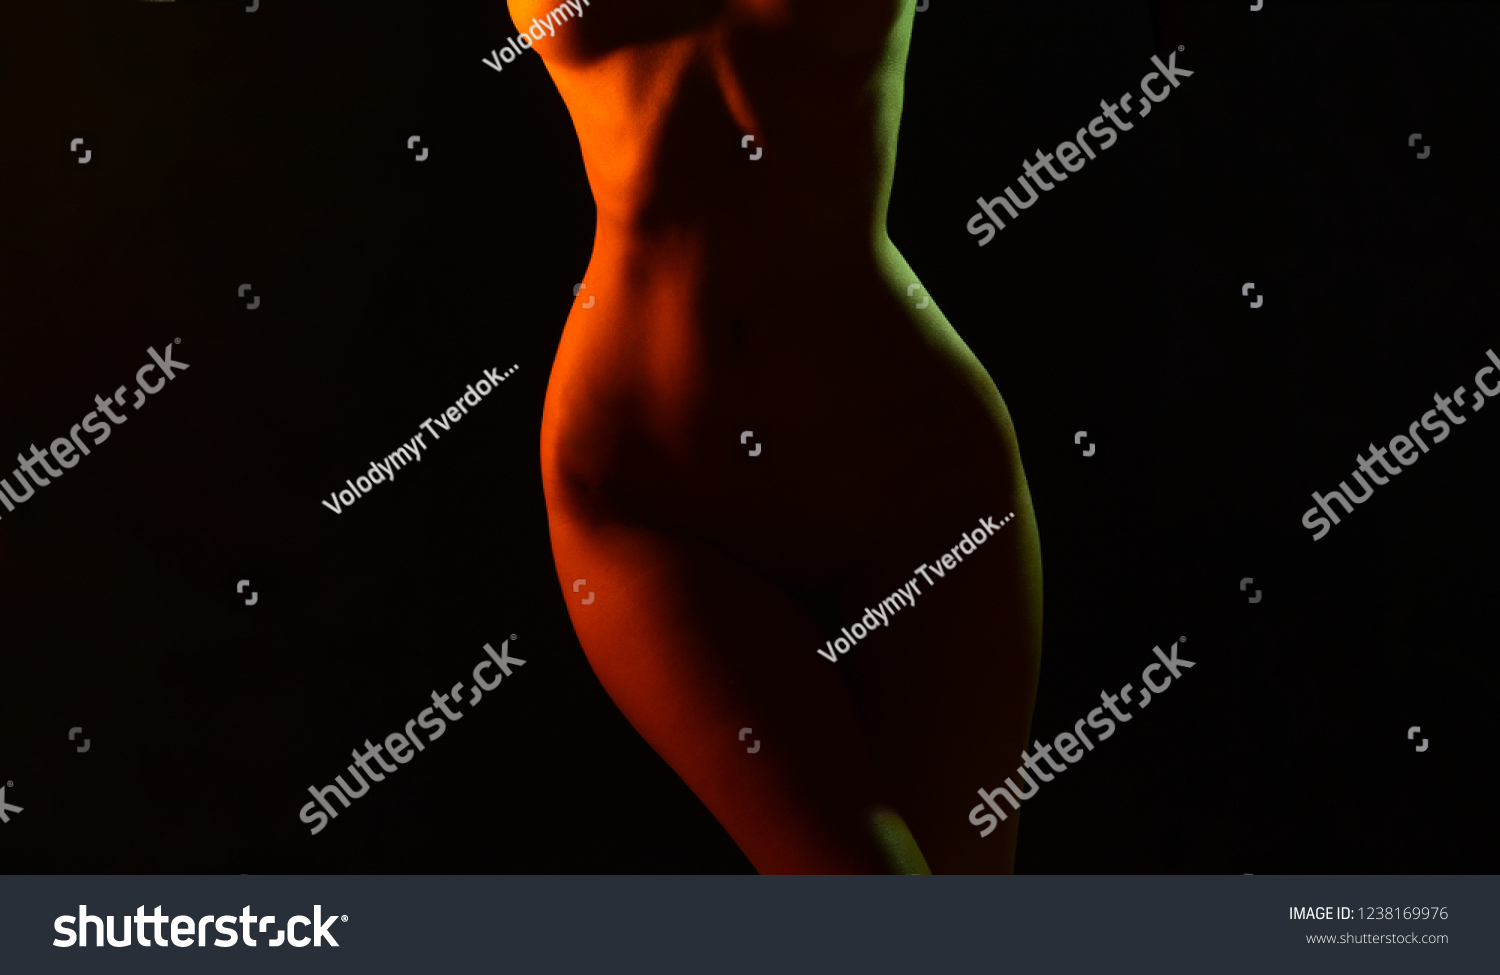 Sensual Womans Hips Sexy Hips Silhouette Stockfoto 1238169976